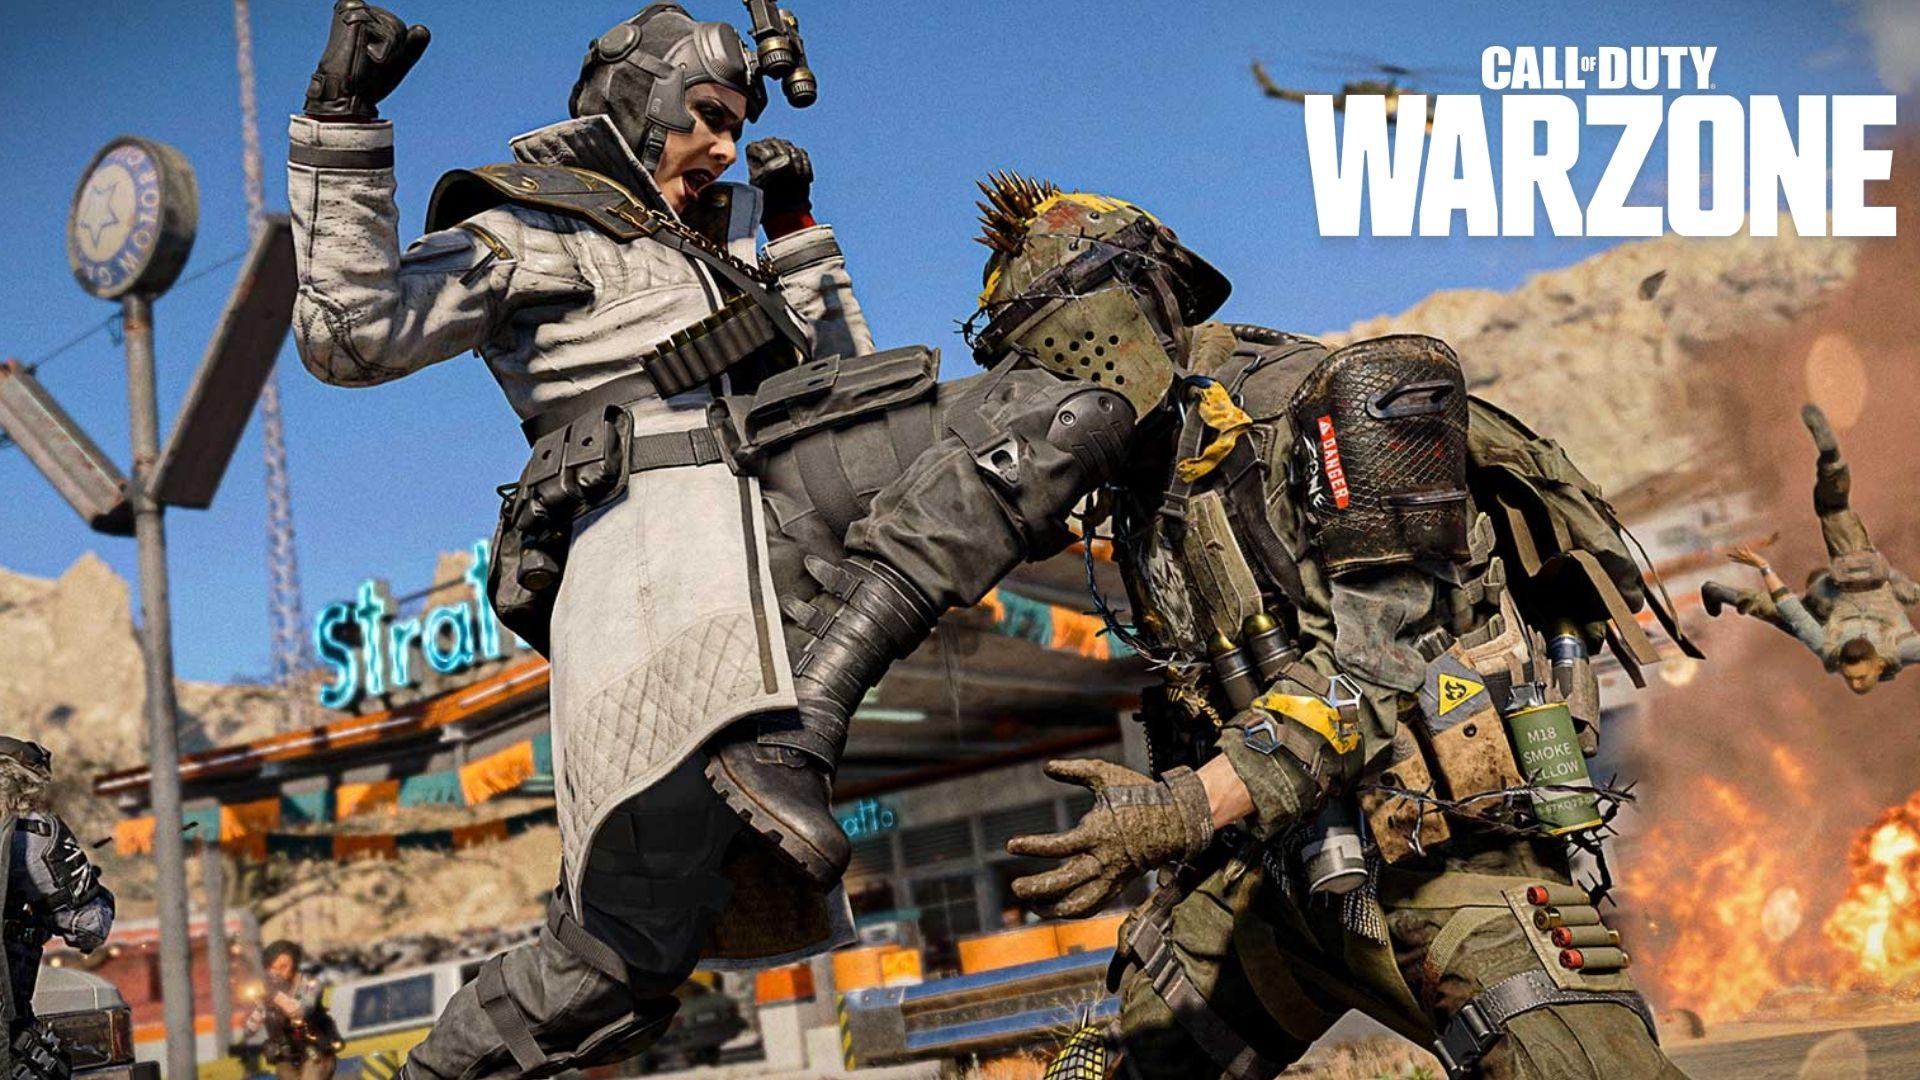 Does COD Warzone have any cross-play? We've got you covered on that, folks.